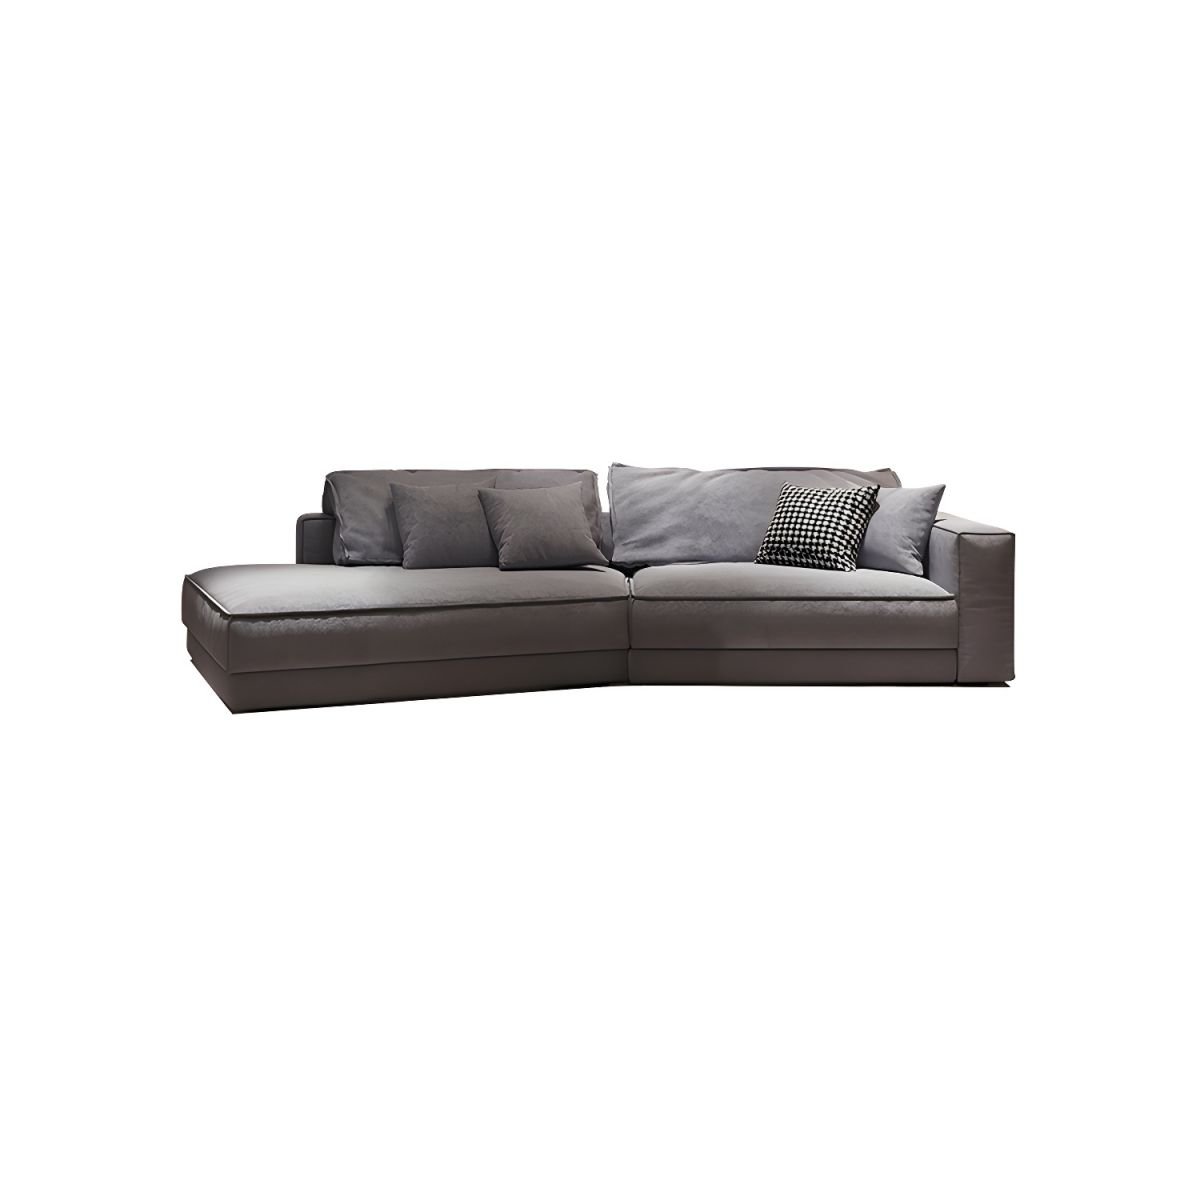 Gray Modern Square Arm Sectional Sofa with 2 Piece Set and No Distressing - Abrasive Cloth Down 118"L x 67"W x 33.5"H Left